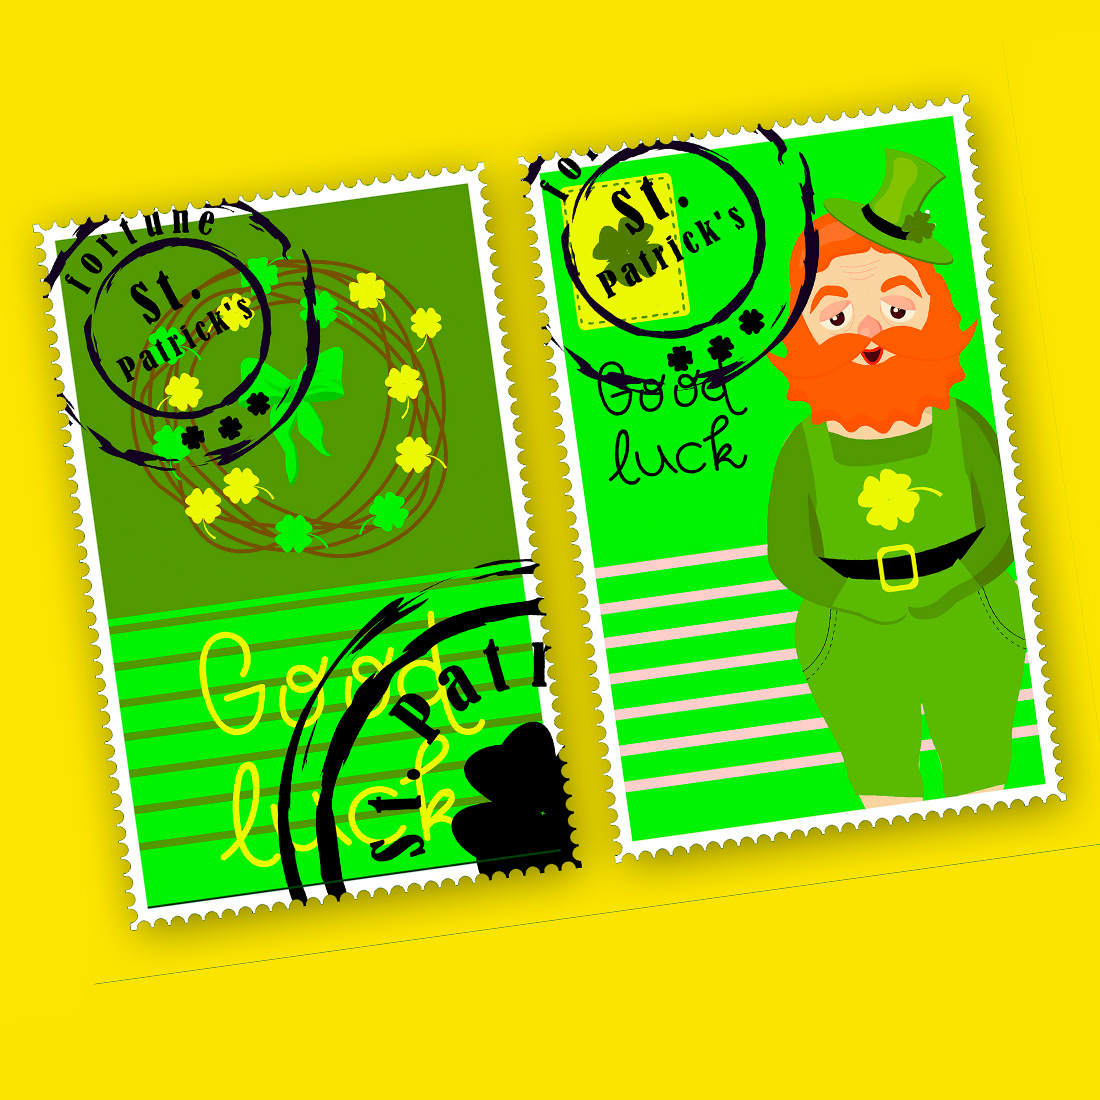 St. Patricks Day Write congratulatory letters and stick these cute stamps on the envelope.